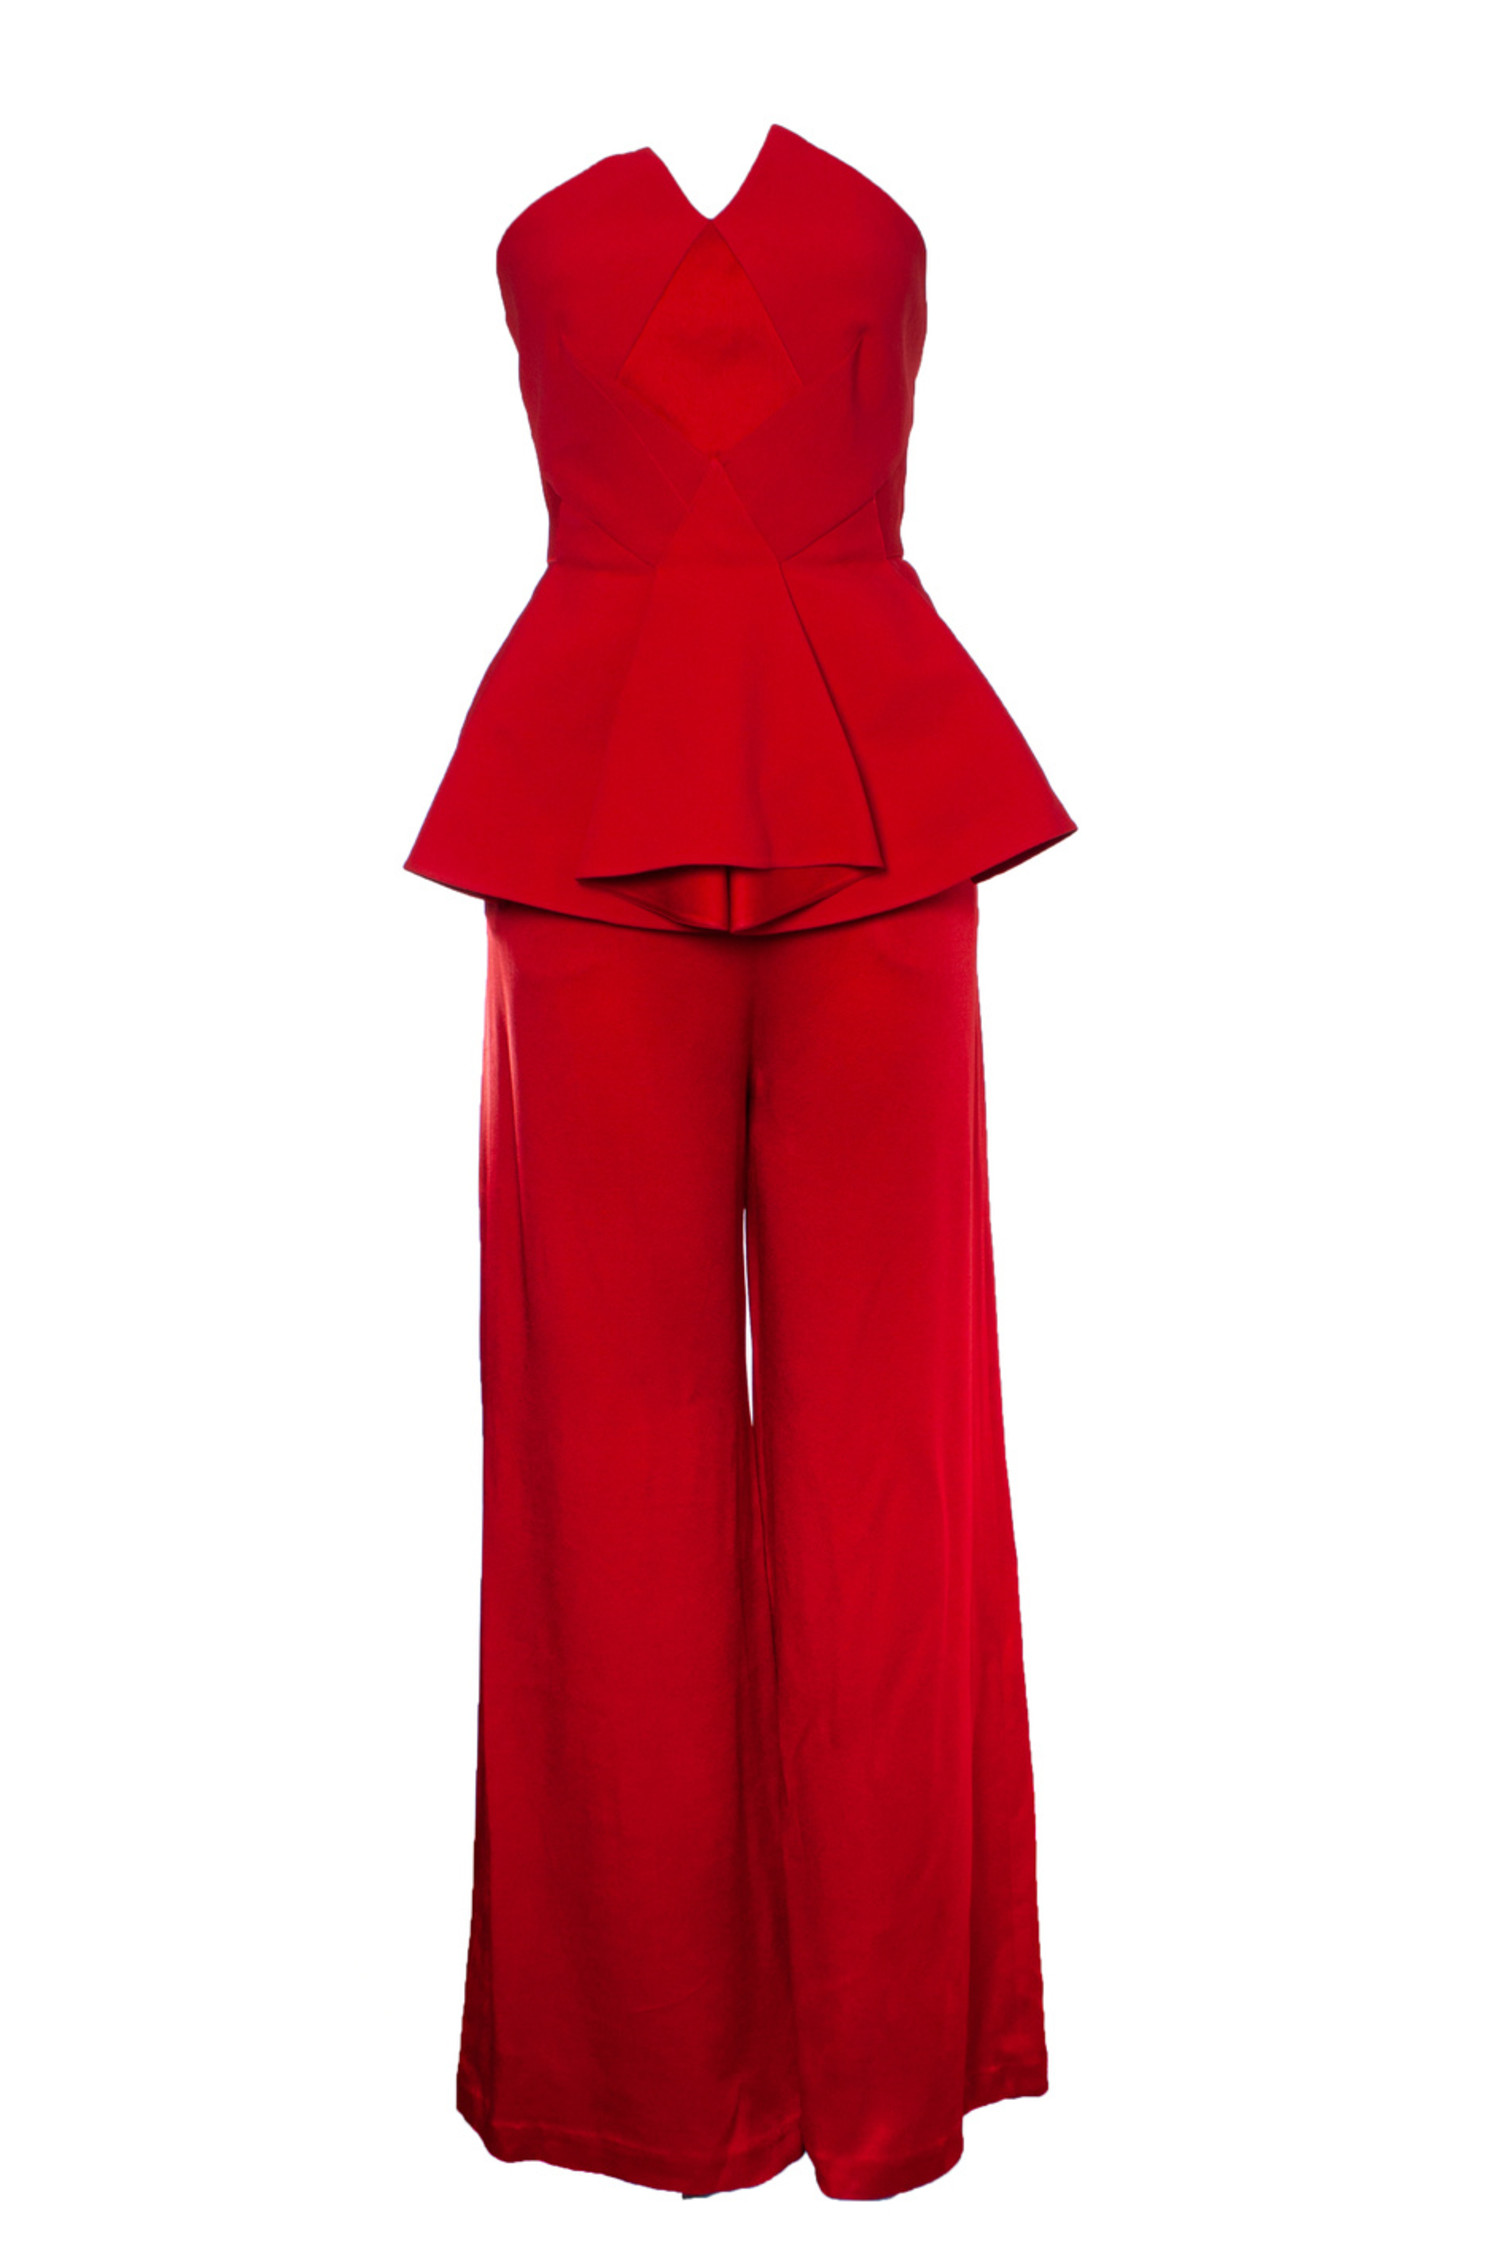 Fusion Fashion Moycullen - ❤ Incredible red jumpsuit with Beautiful satin  peplum detailing... #wedding #communion #style #wow #red Size 10 to 16 €275  Call 091555015 to order xo | Facebook